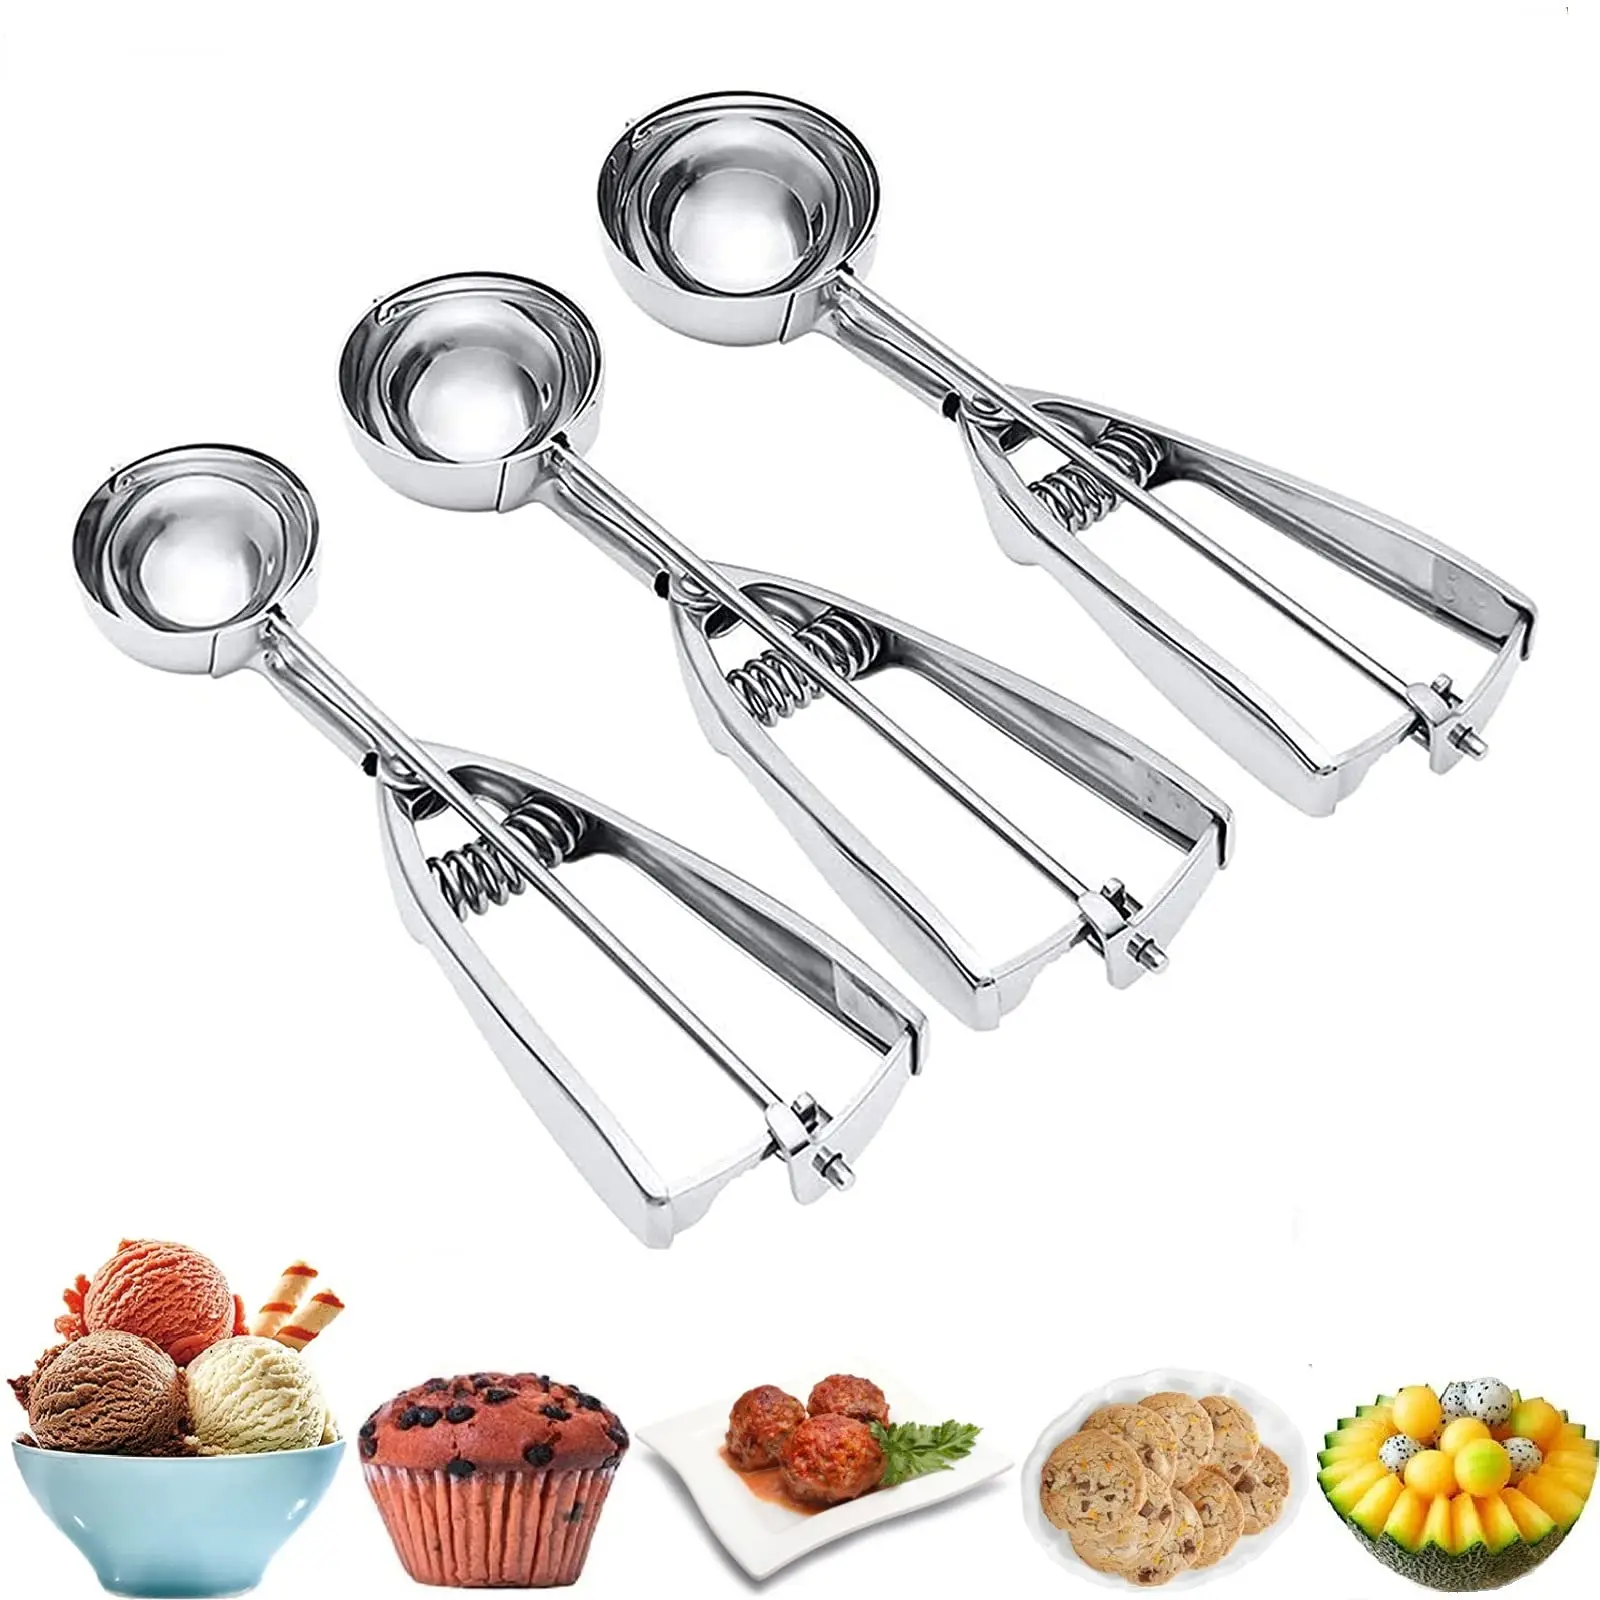 

Ice Cream Scoop 3Pcs Cookie Scoop Set Stainless Steel Scooper with Trigger Release Large/Medium/Small Size